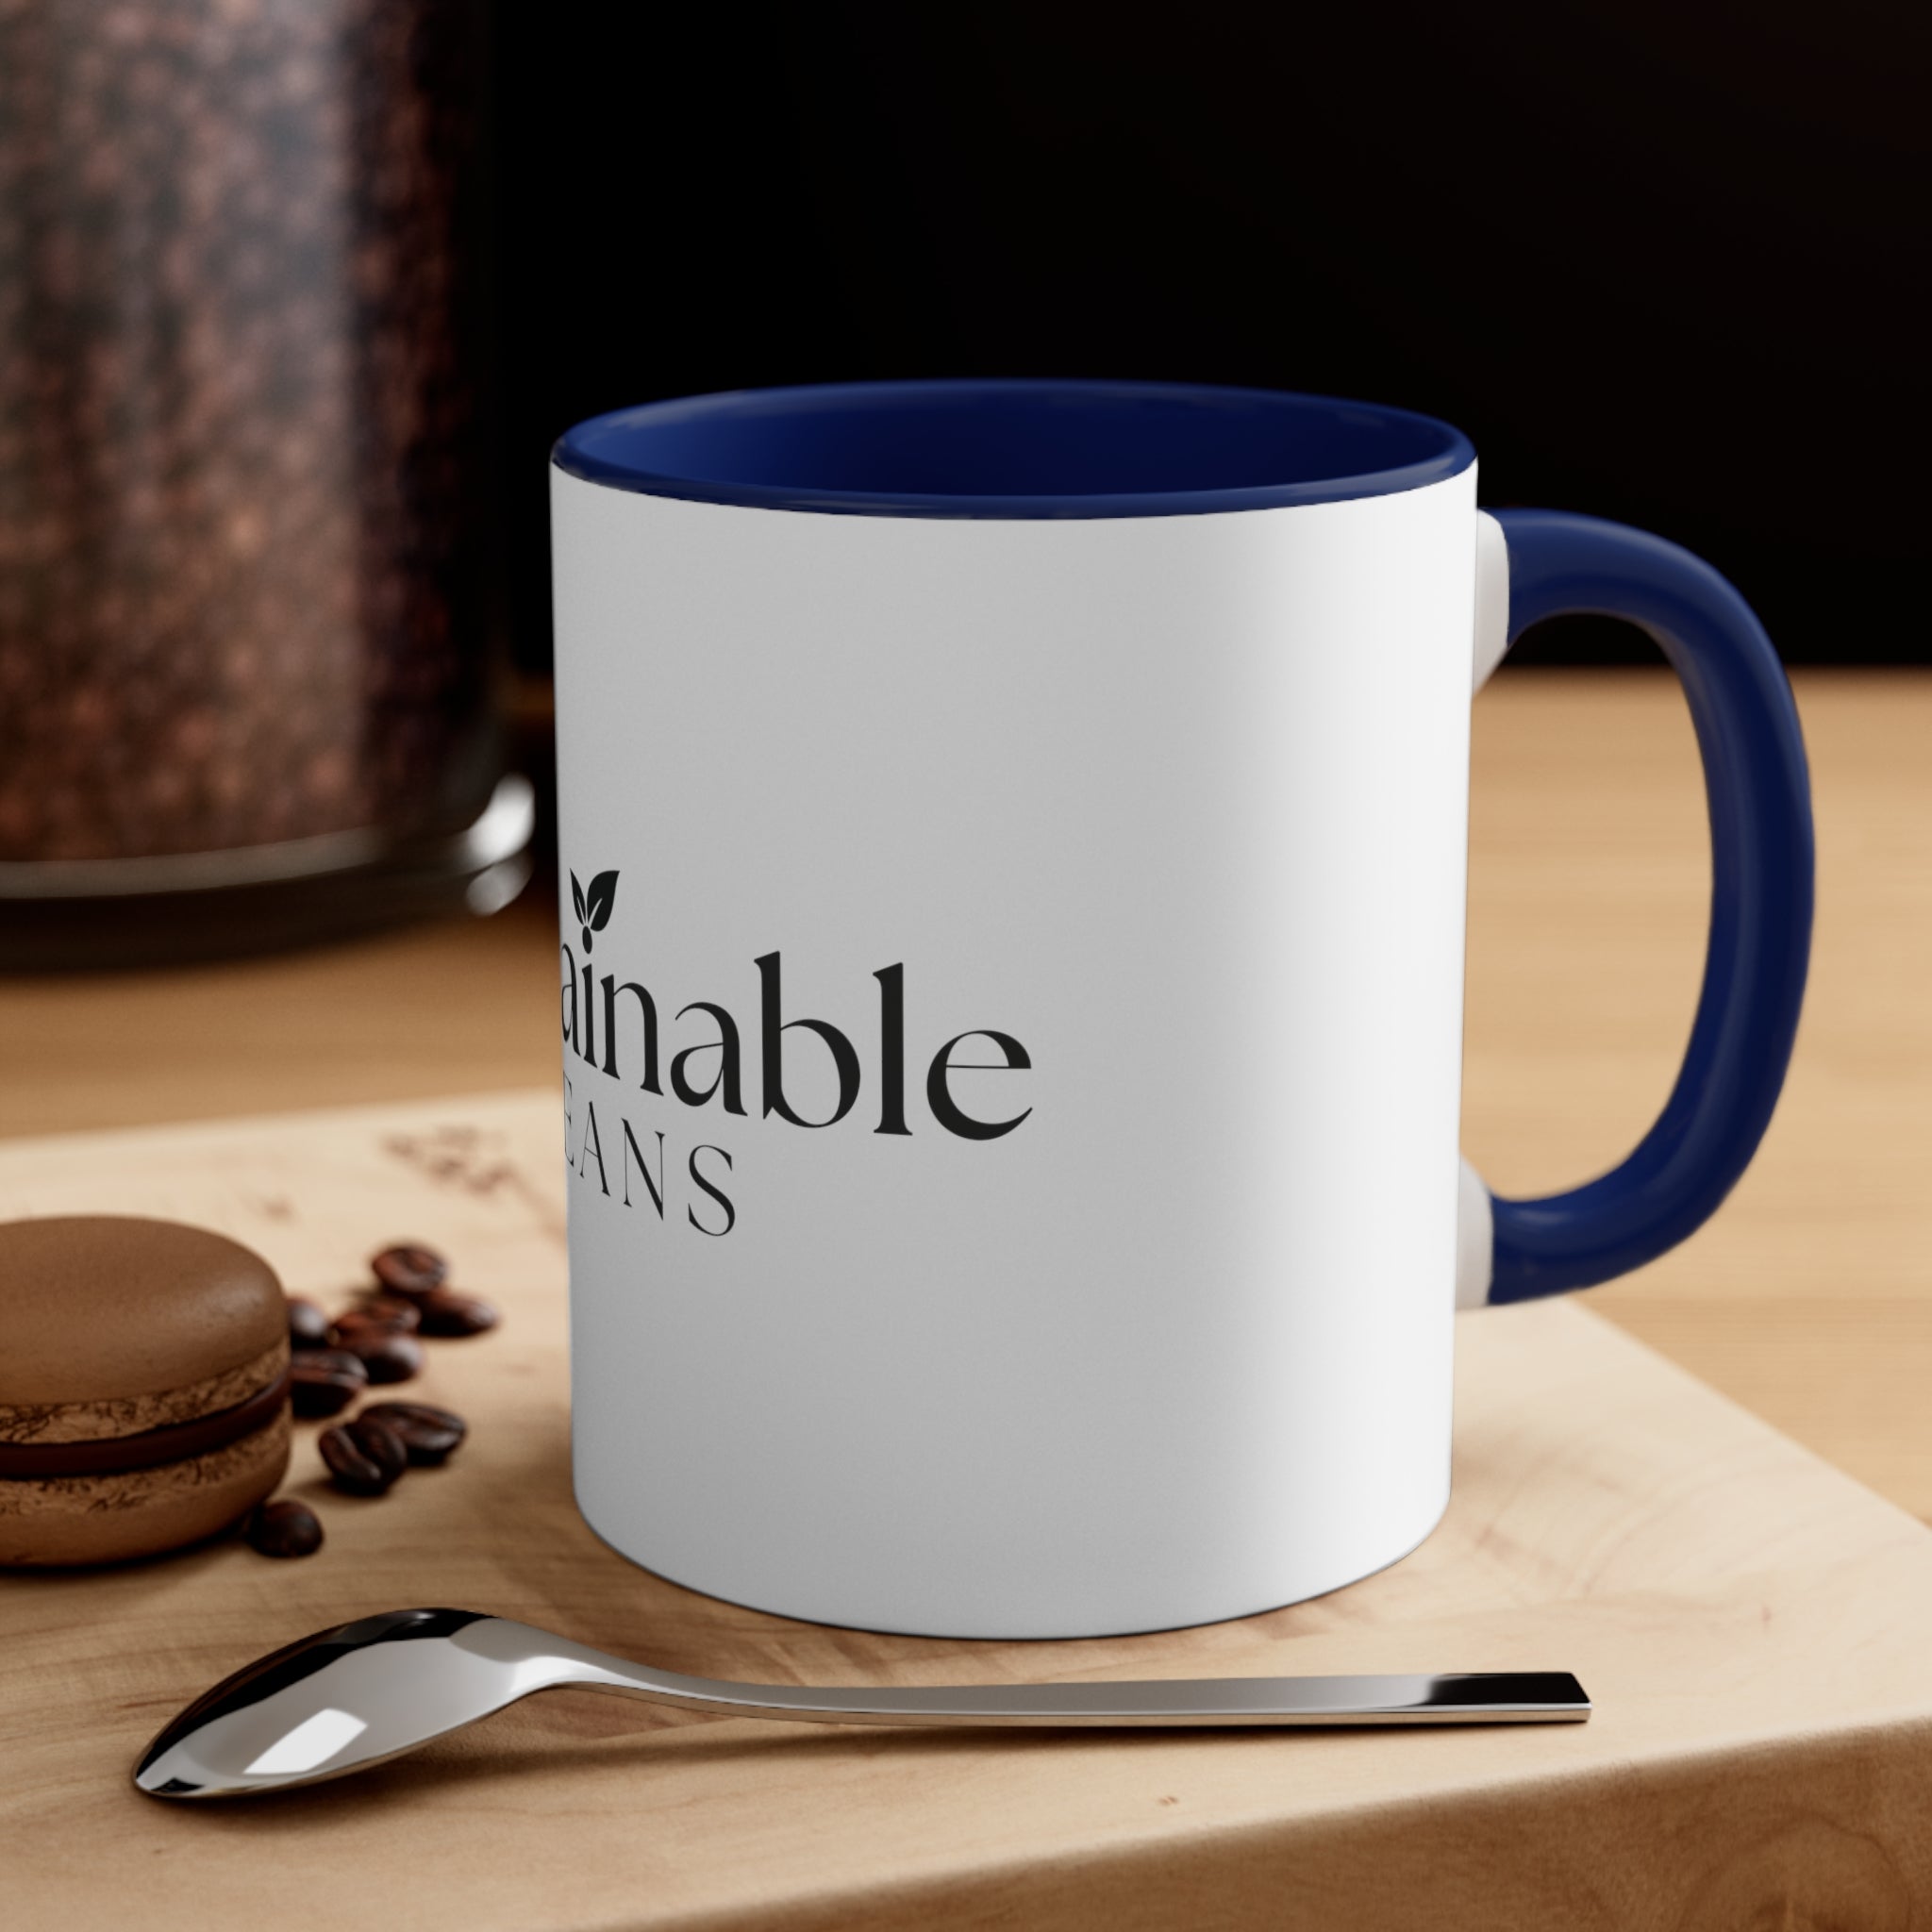 Brighten Your Day: With this 11oz Coffee Mug - Sustainable Beans